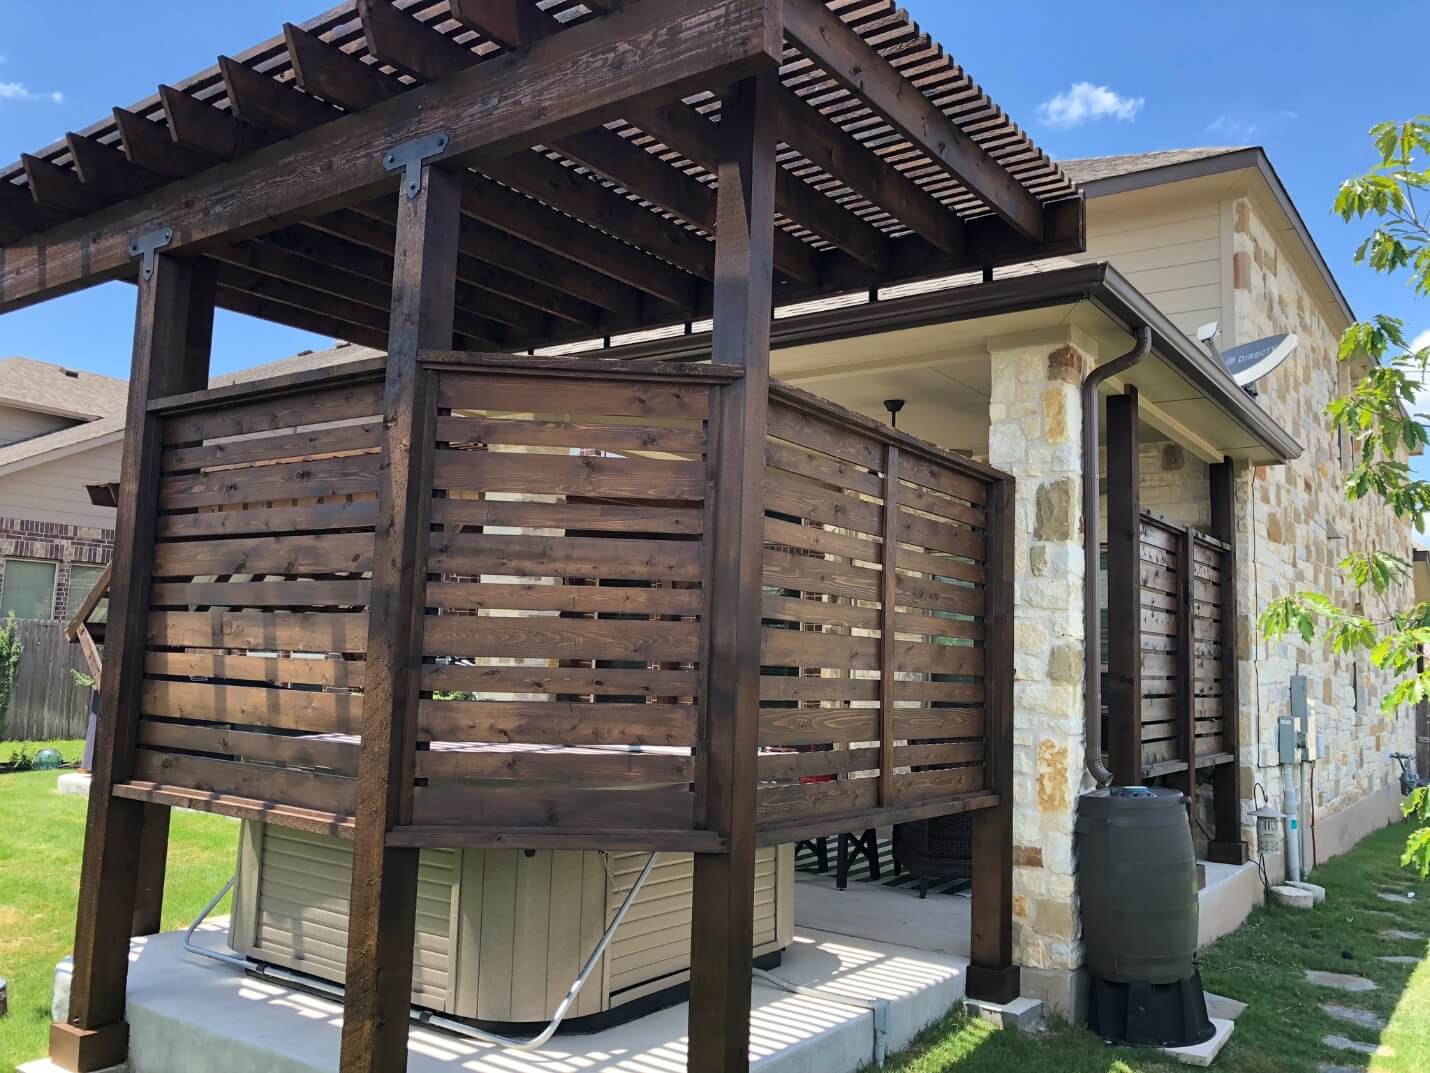 Hot tub with pergola and privacy wall